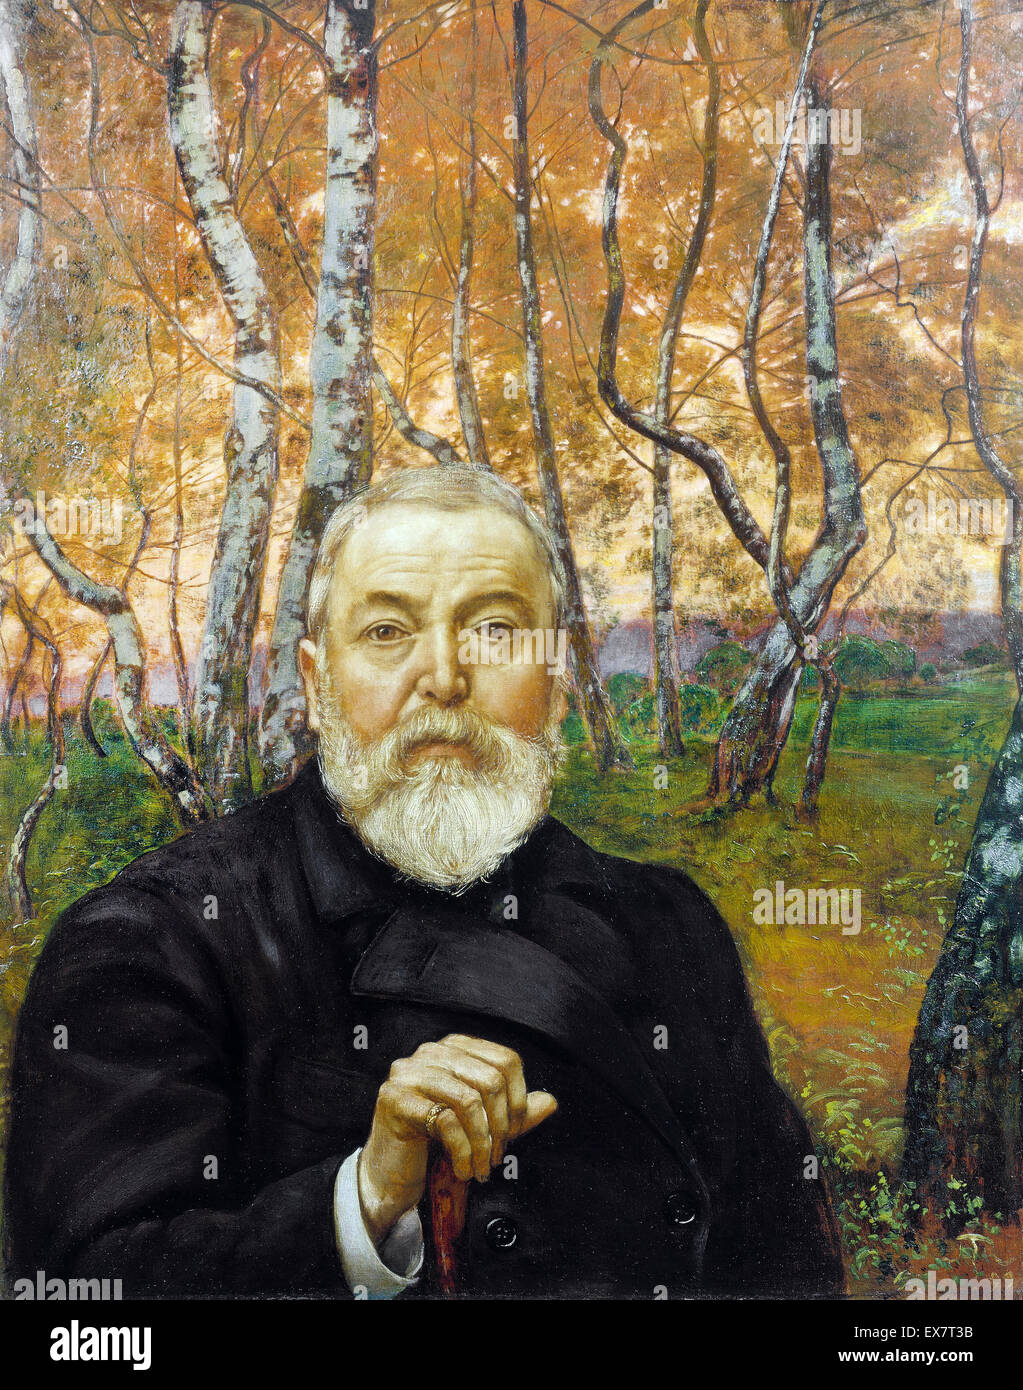 Hans Thoma, Self-portrait in Front of a Birch Forest 1899 Oil on canvas. Stadel, Frankfurt am Main, Germany. Stock Photo